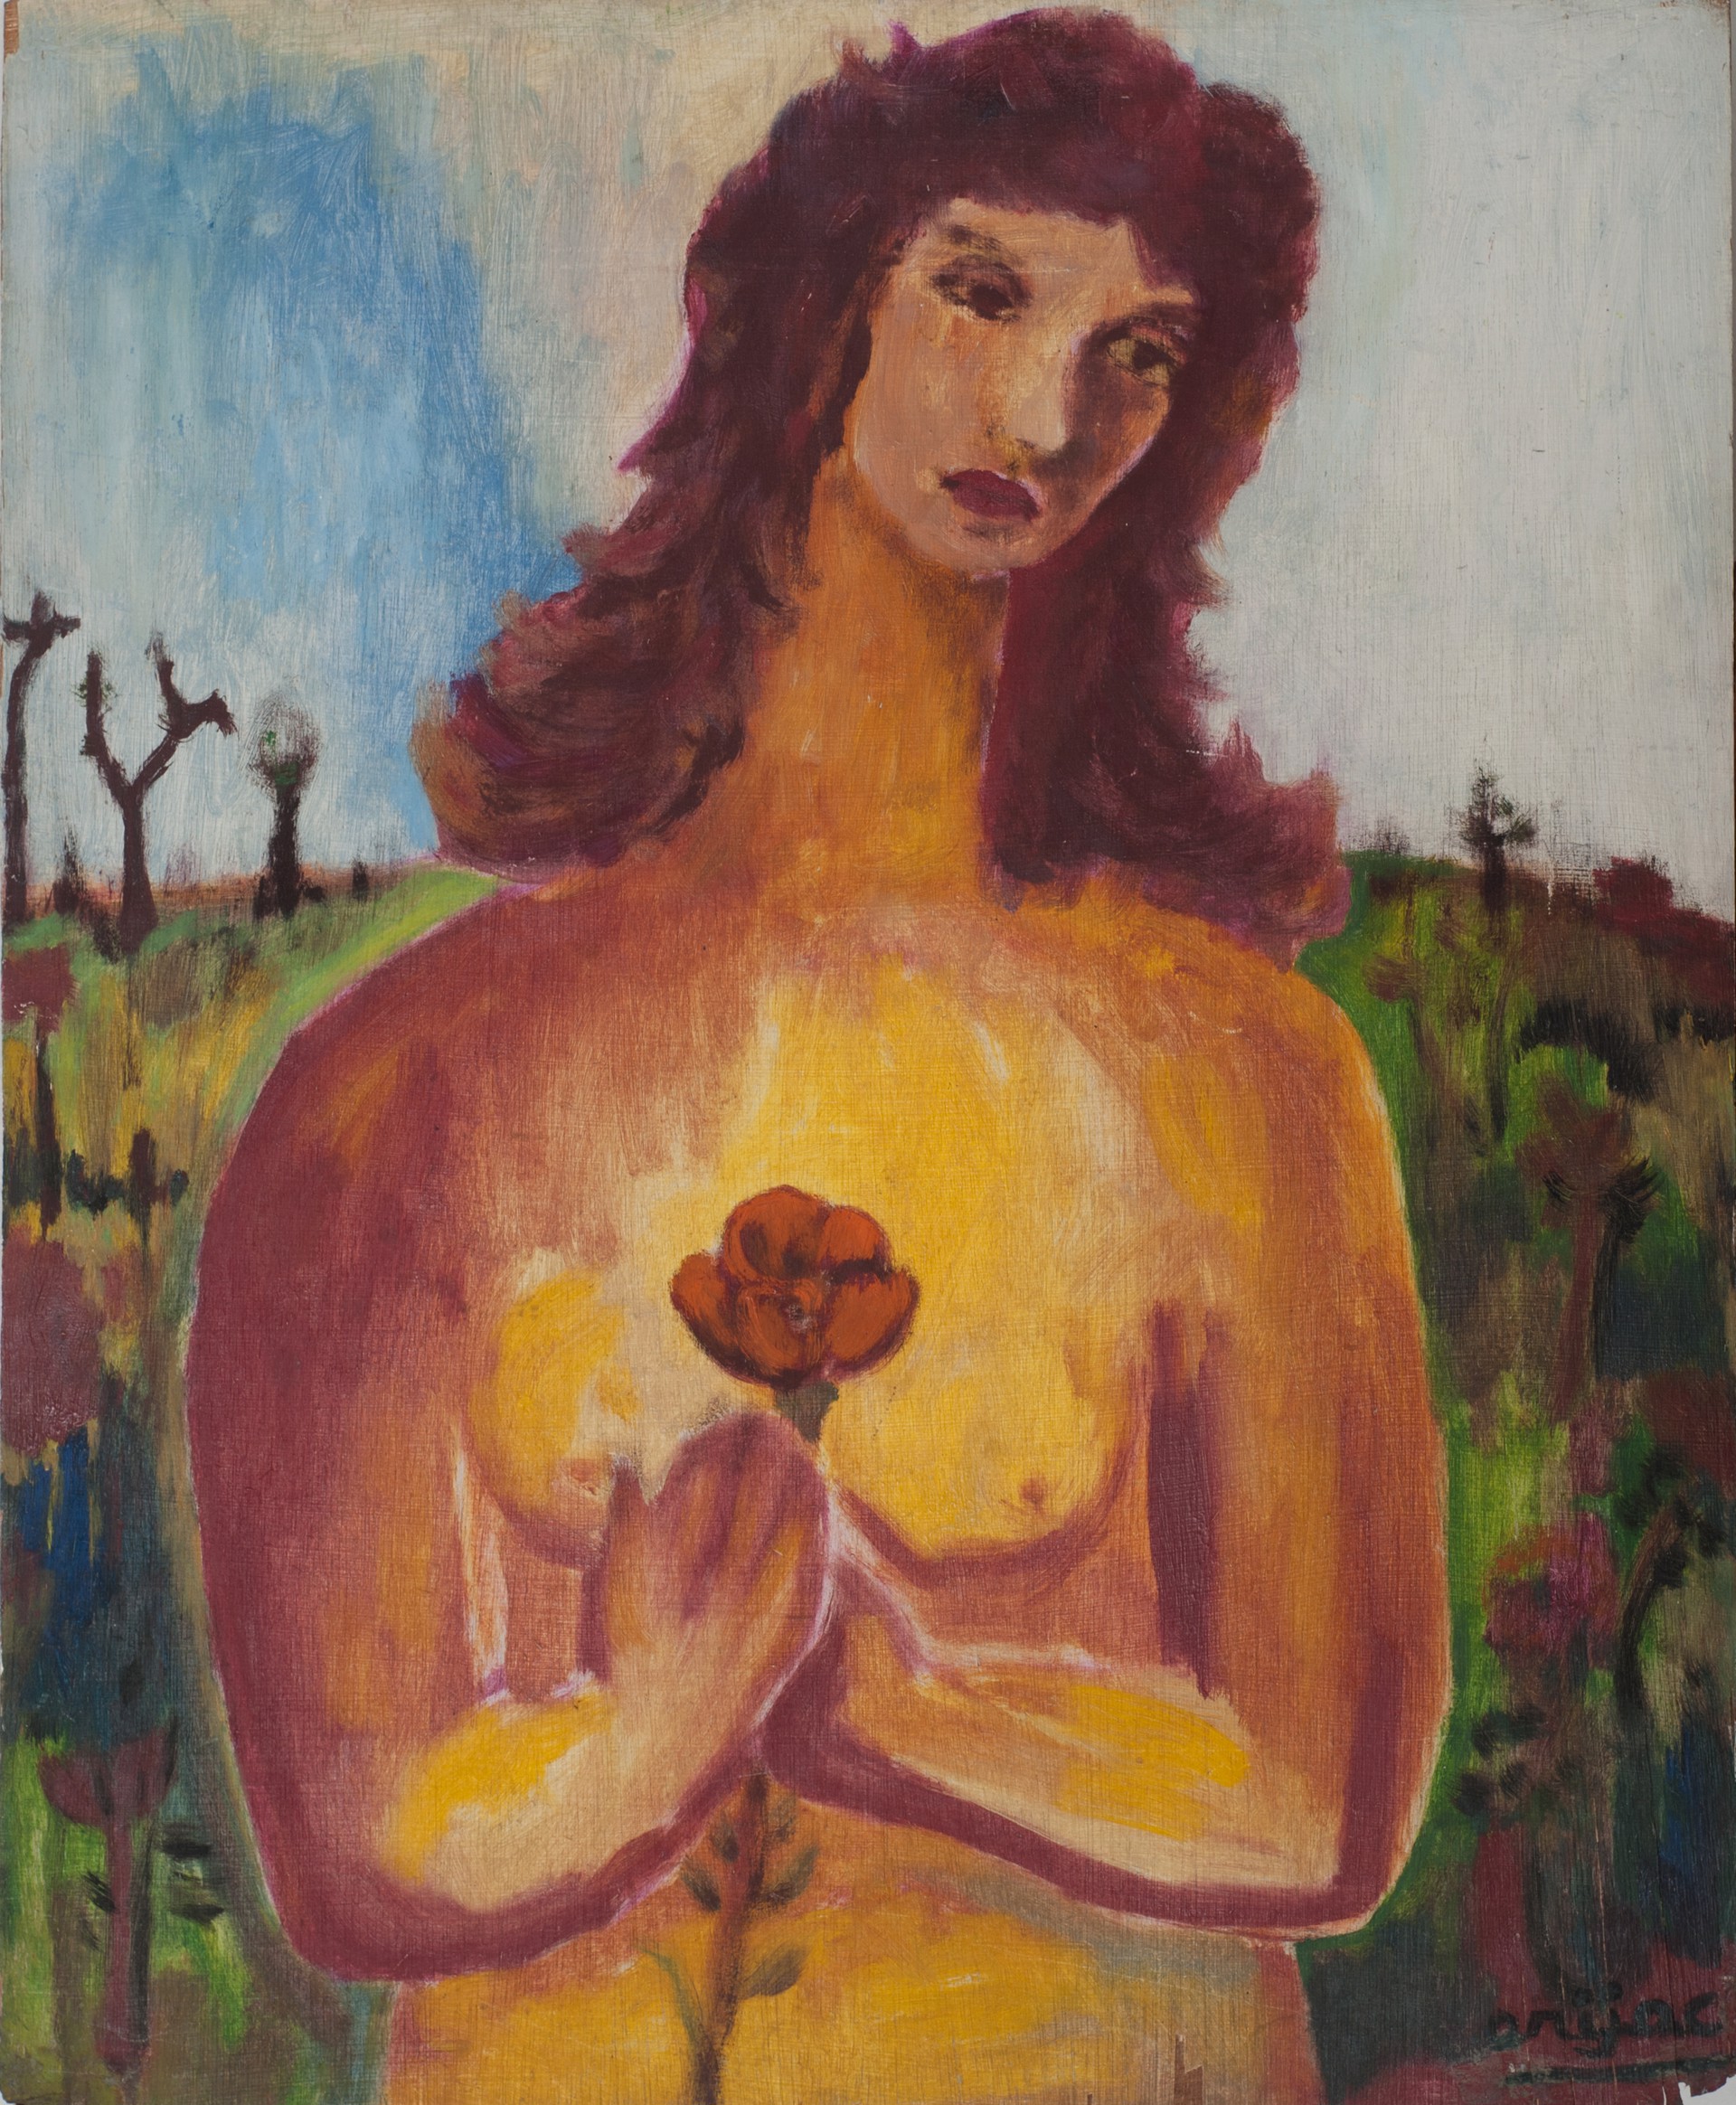 Female Portrait With A Rose #6-3-96GSN by Harry (Arijac) Jacques (Haitian, b. 1937)